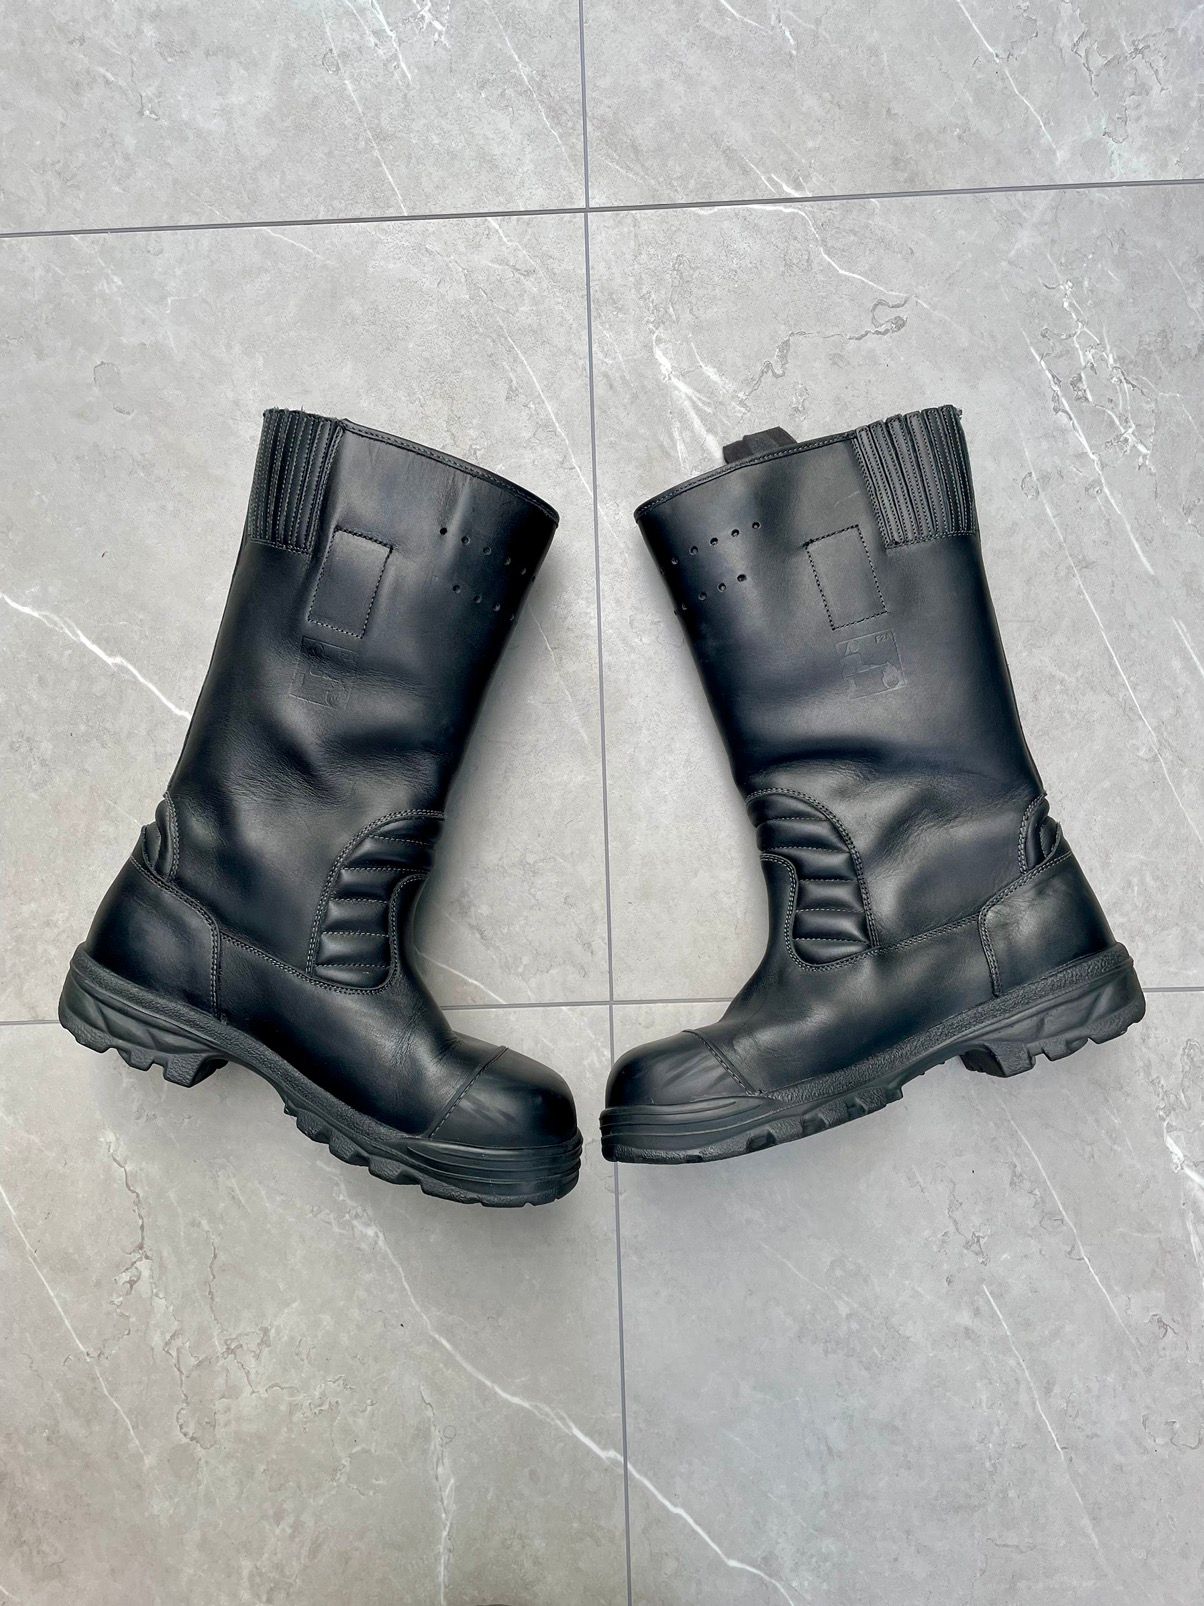 Pre-owned Combat Boots X Military 1960s Vintage Fireman Boots In Black